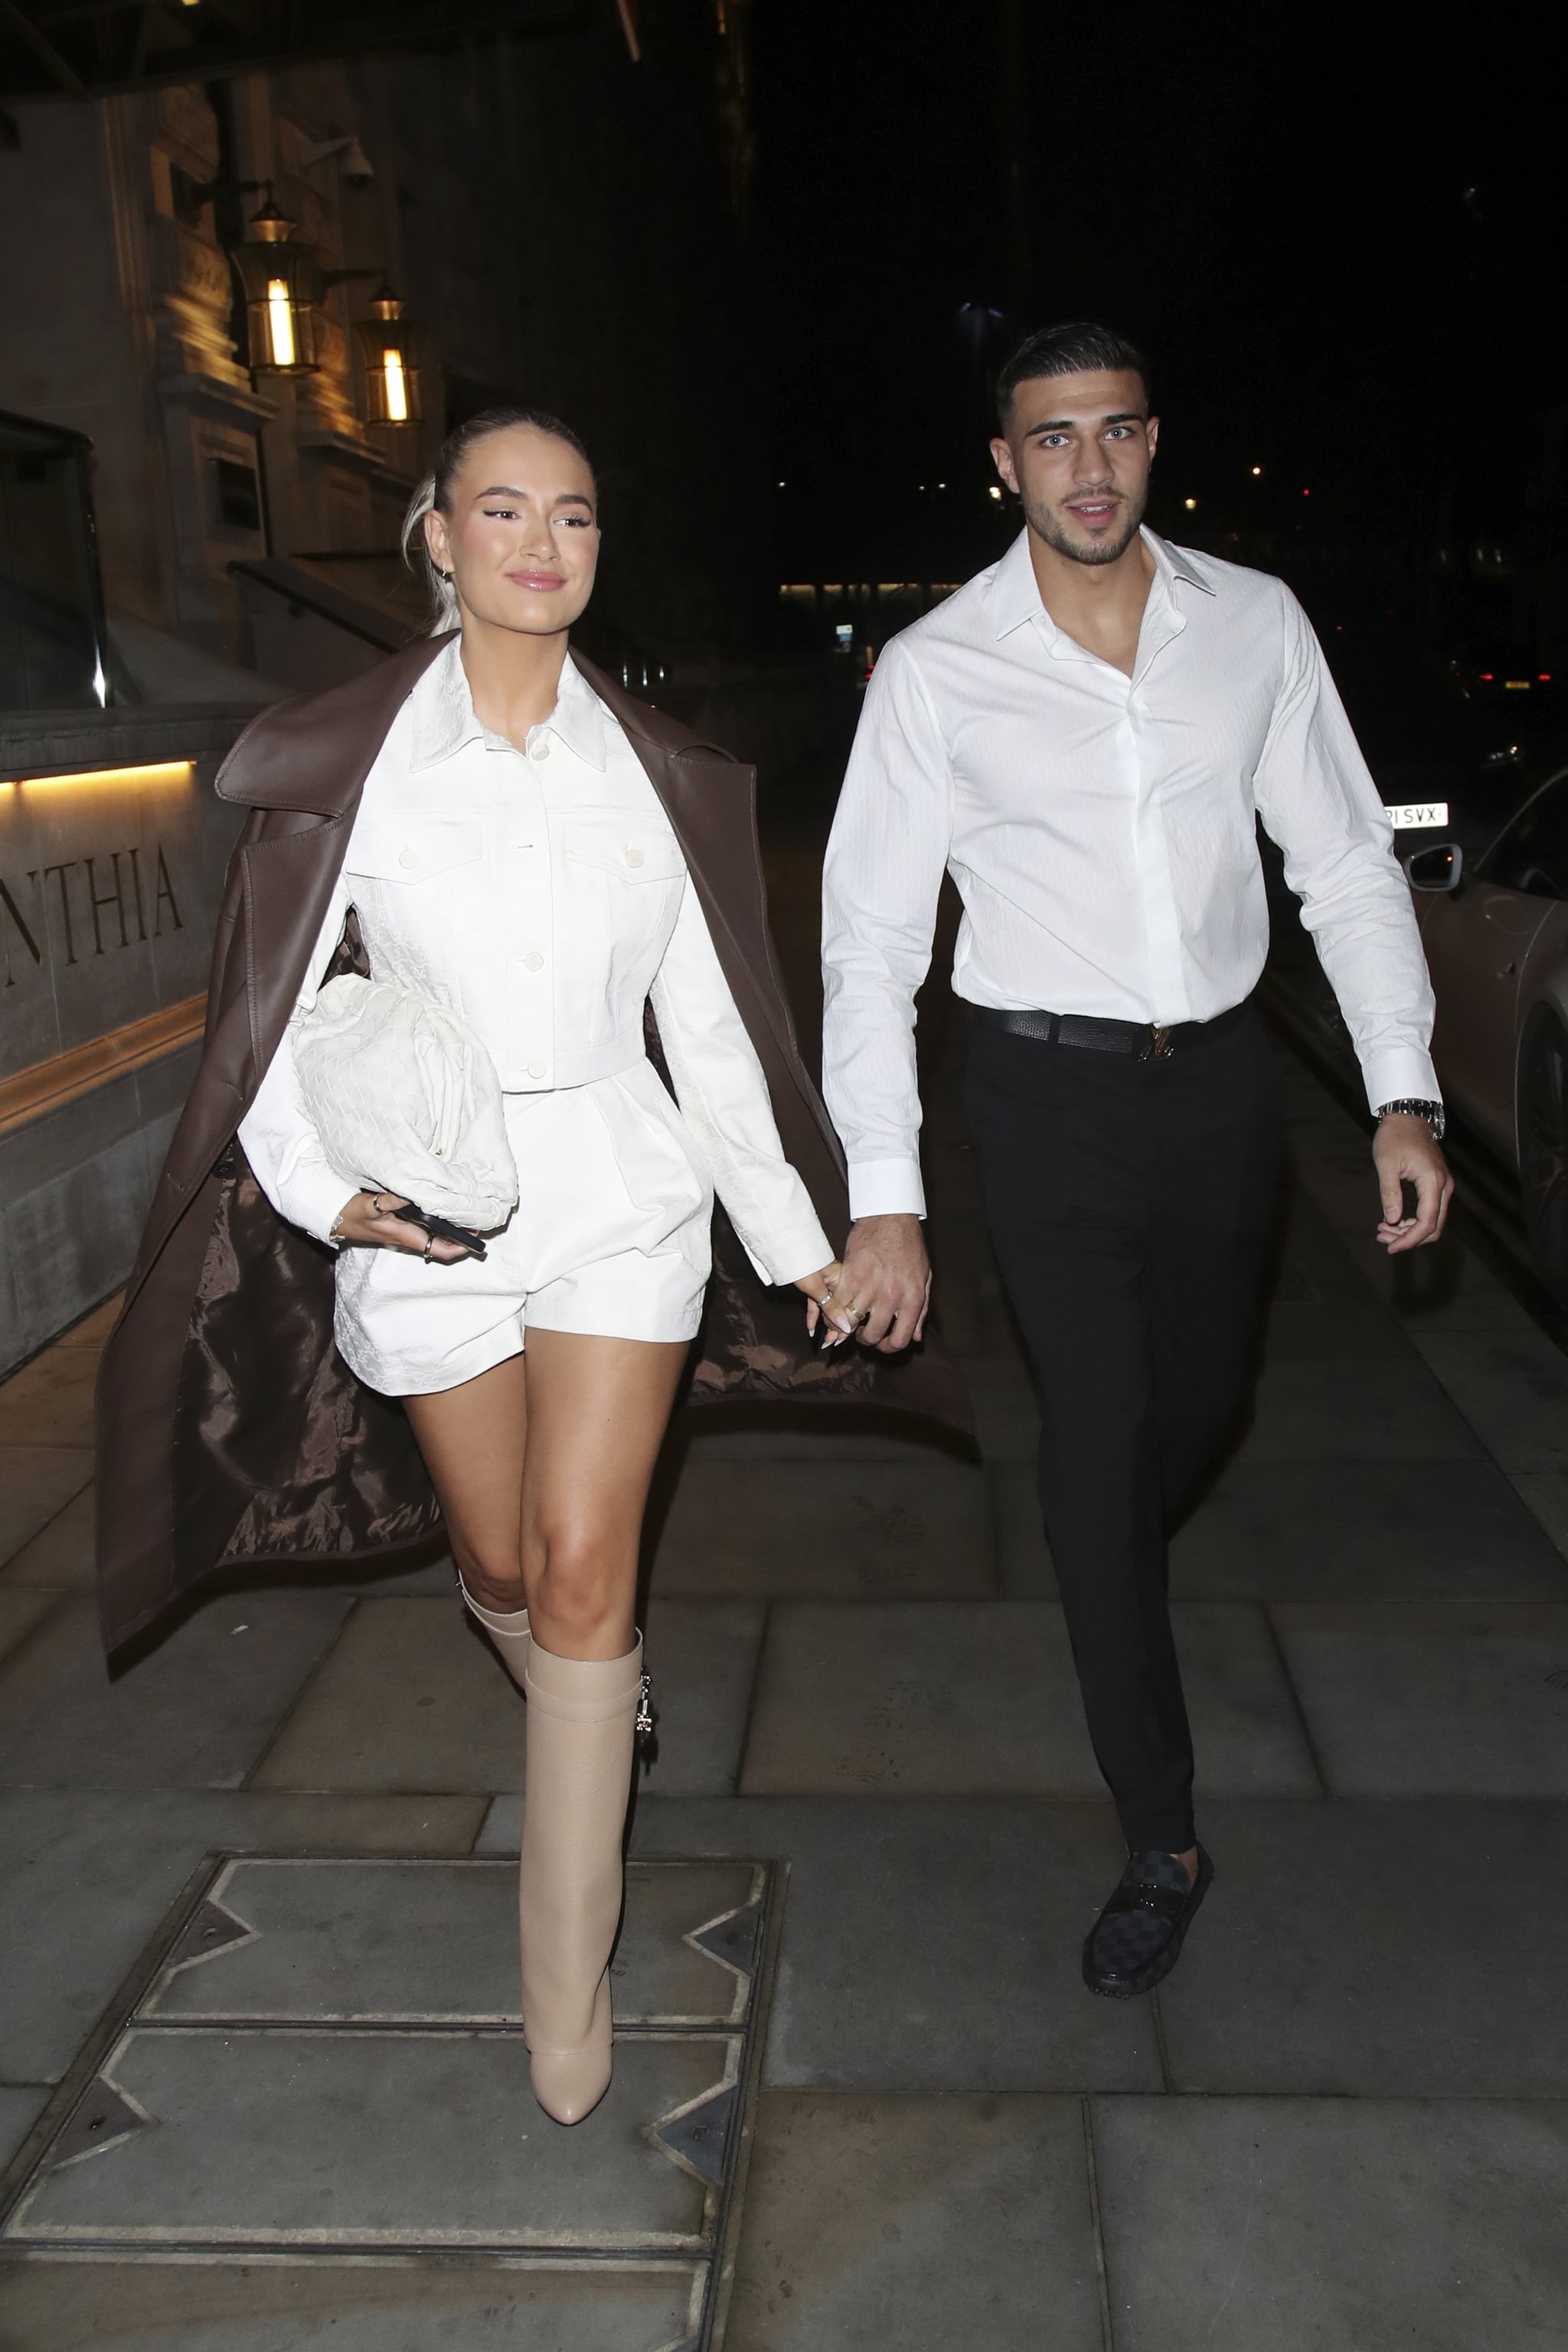 LONDON, ENGLAND - FEBRUARY 14: Molly-Mae Hague and Tommy Fury seen leaving their hotel on February 14, 2022 in London, England. (Photo by GC Images)